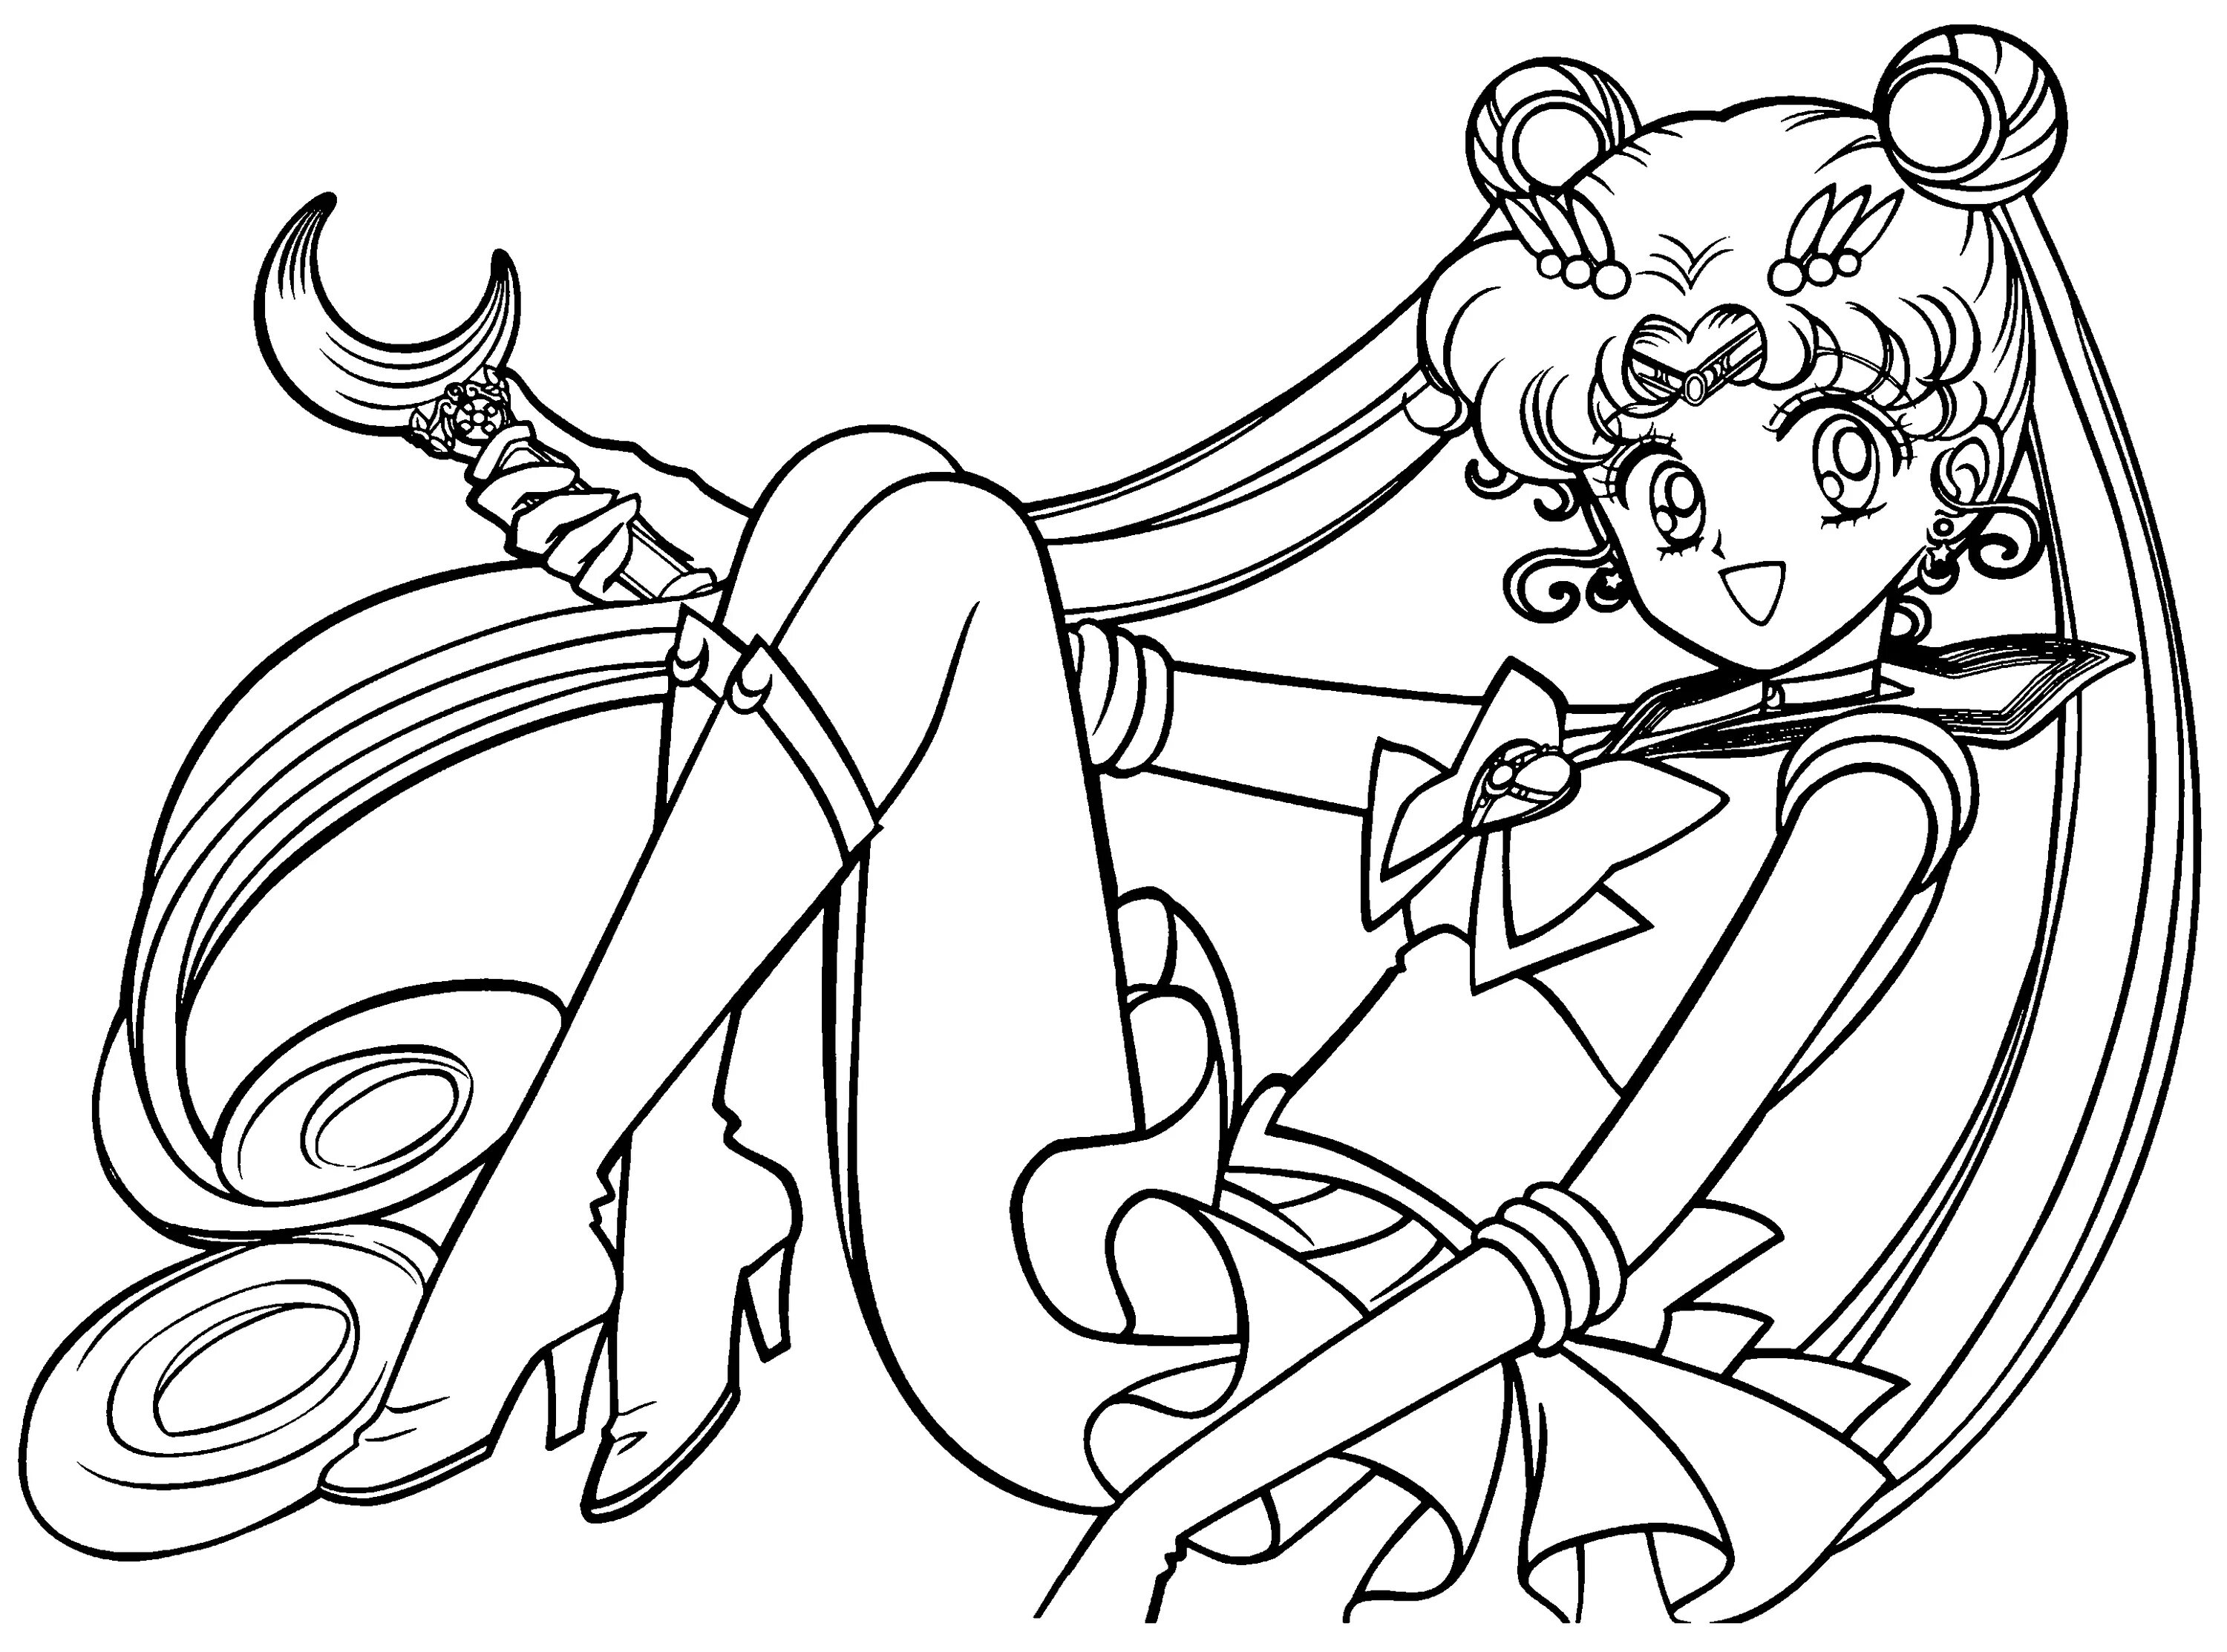 Serene coloring book for girls sailor moon